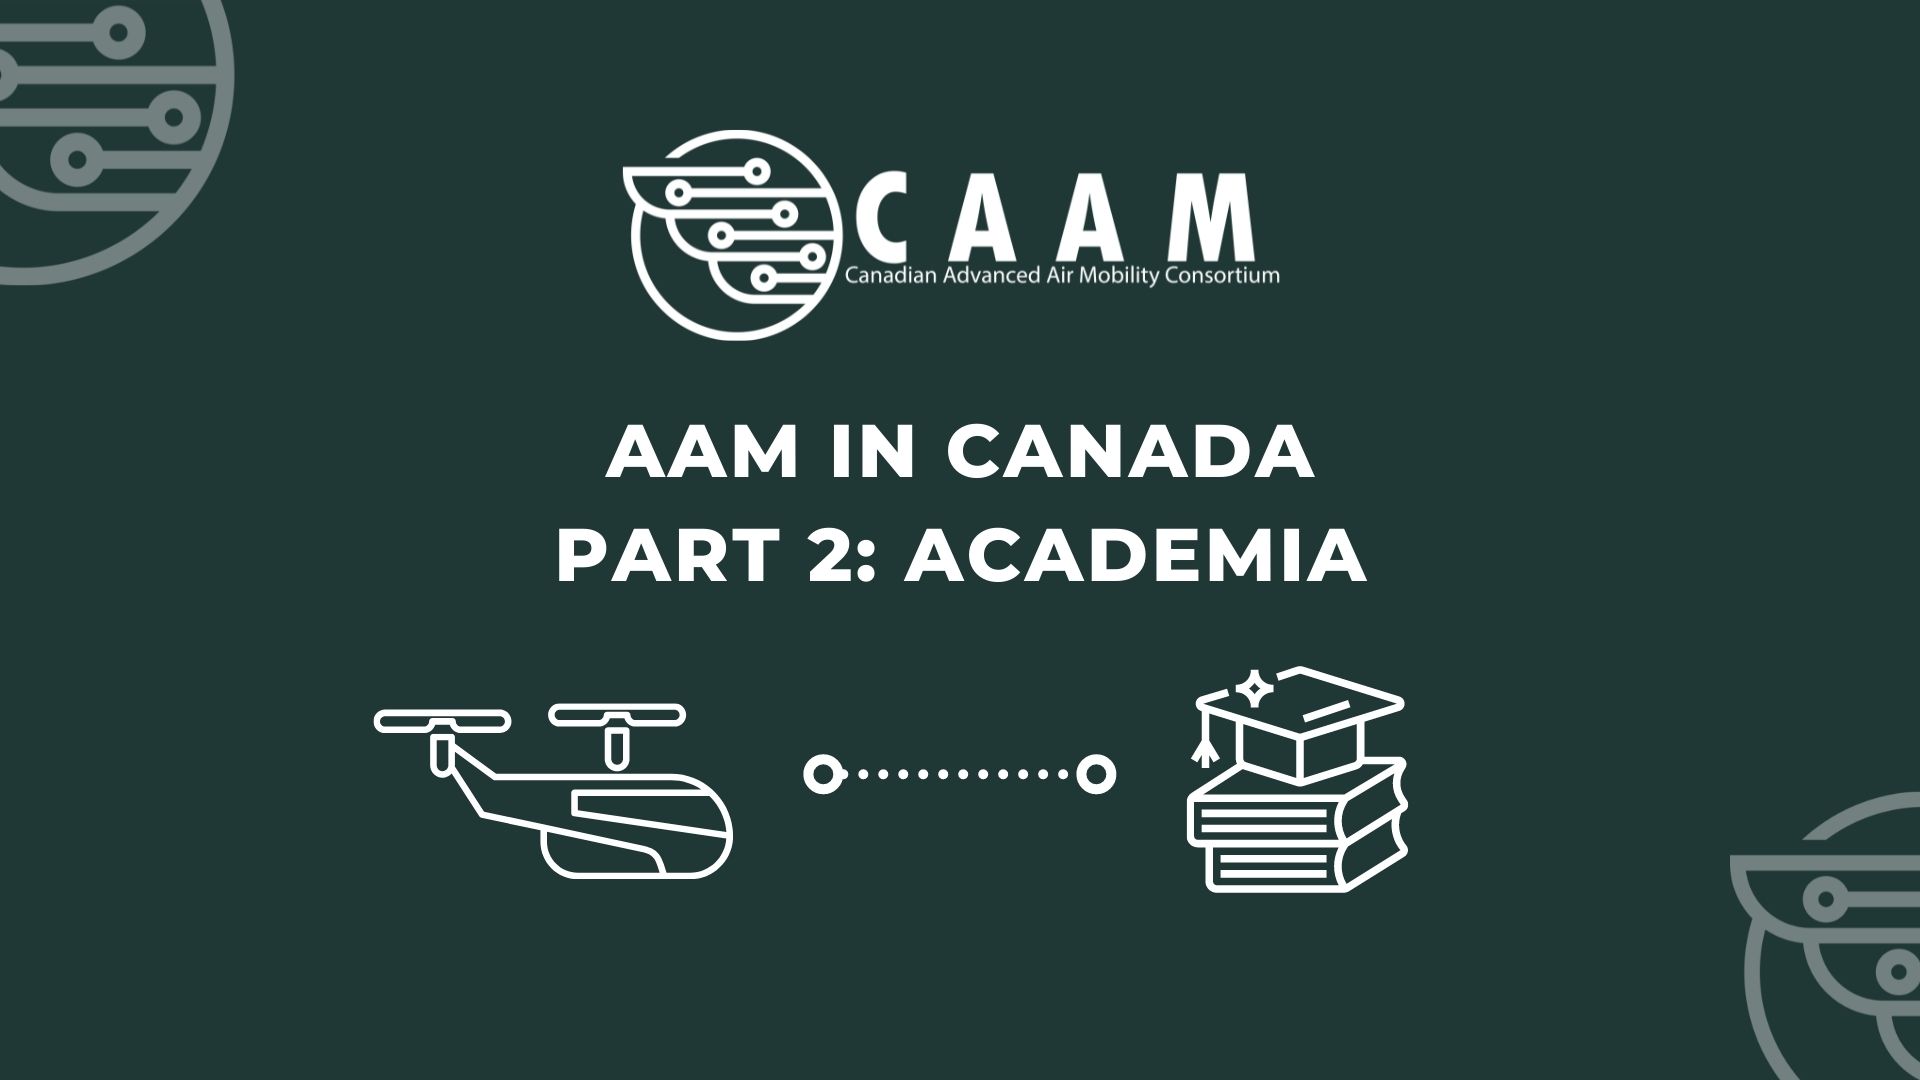 AAM IN CANADA - PART 2, ACADEMIA